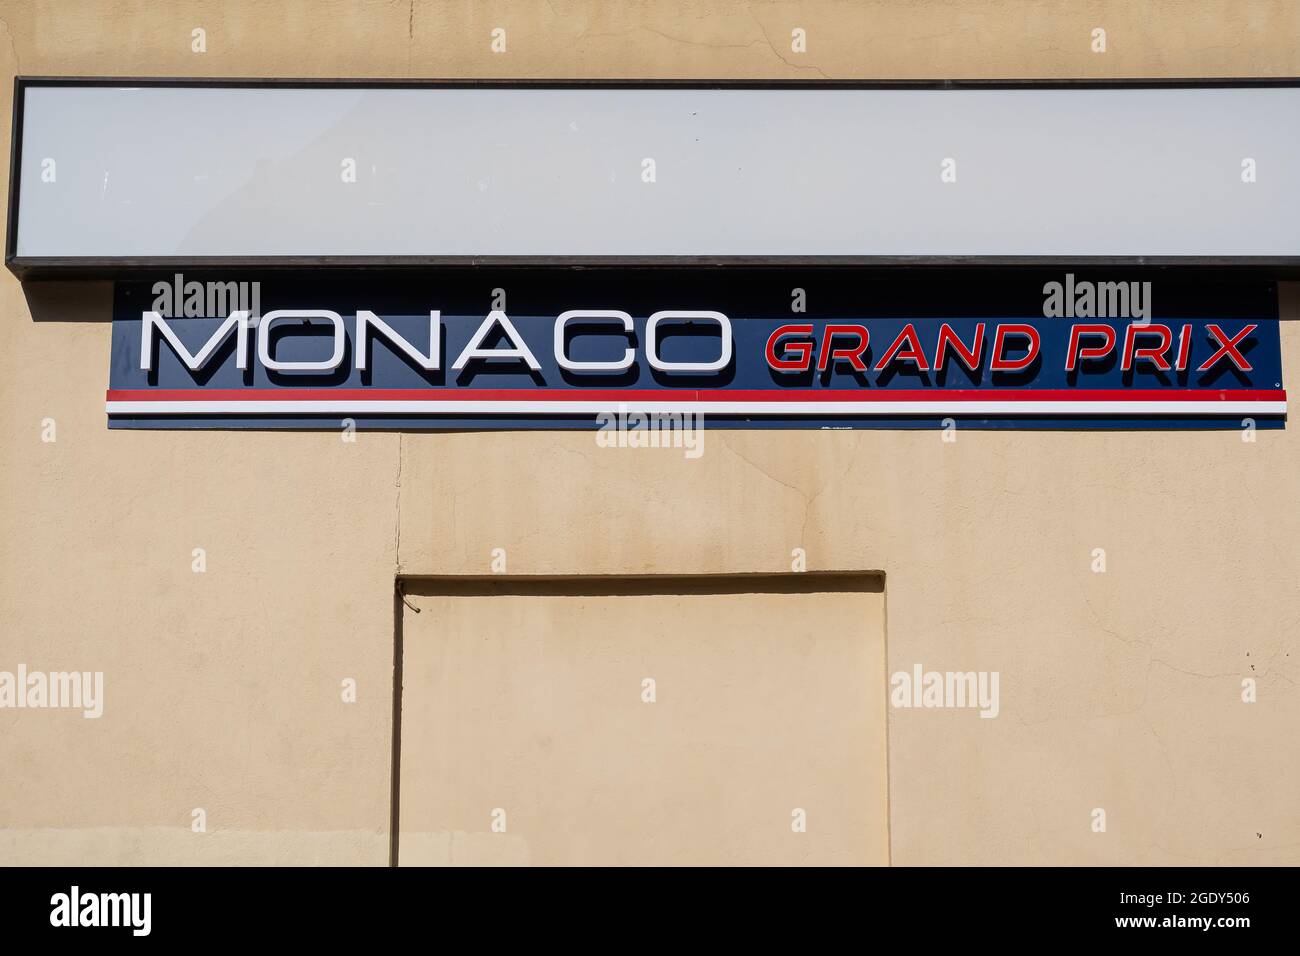 Menton, France - July 2, 2020: Monaco grand prix store in Menton, selling products relating to grand prix formule 1 Stock Photo